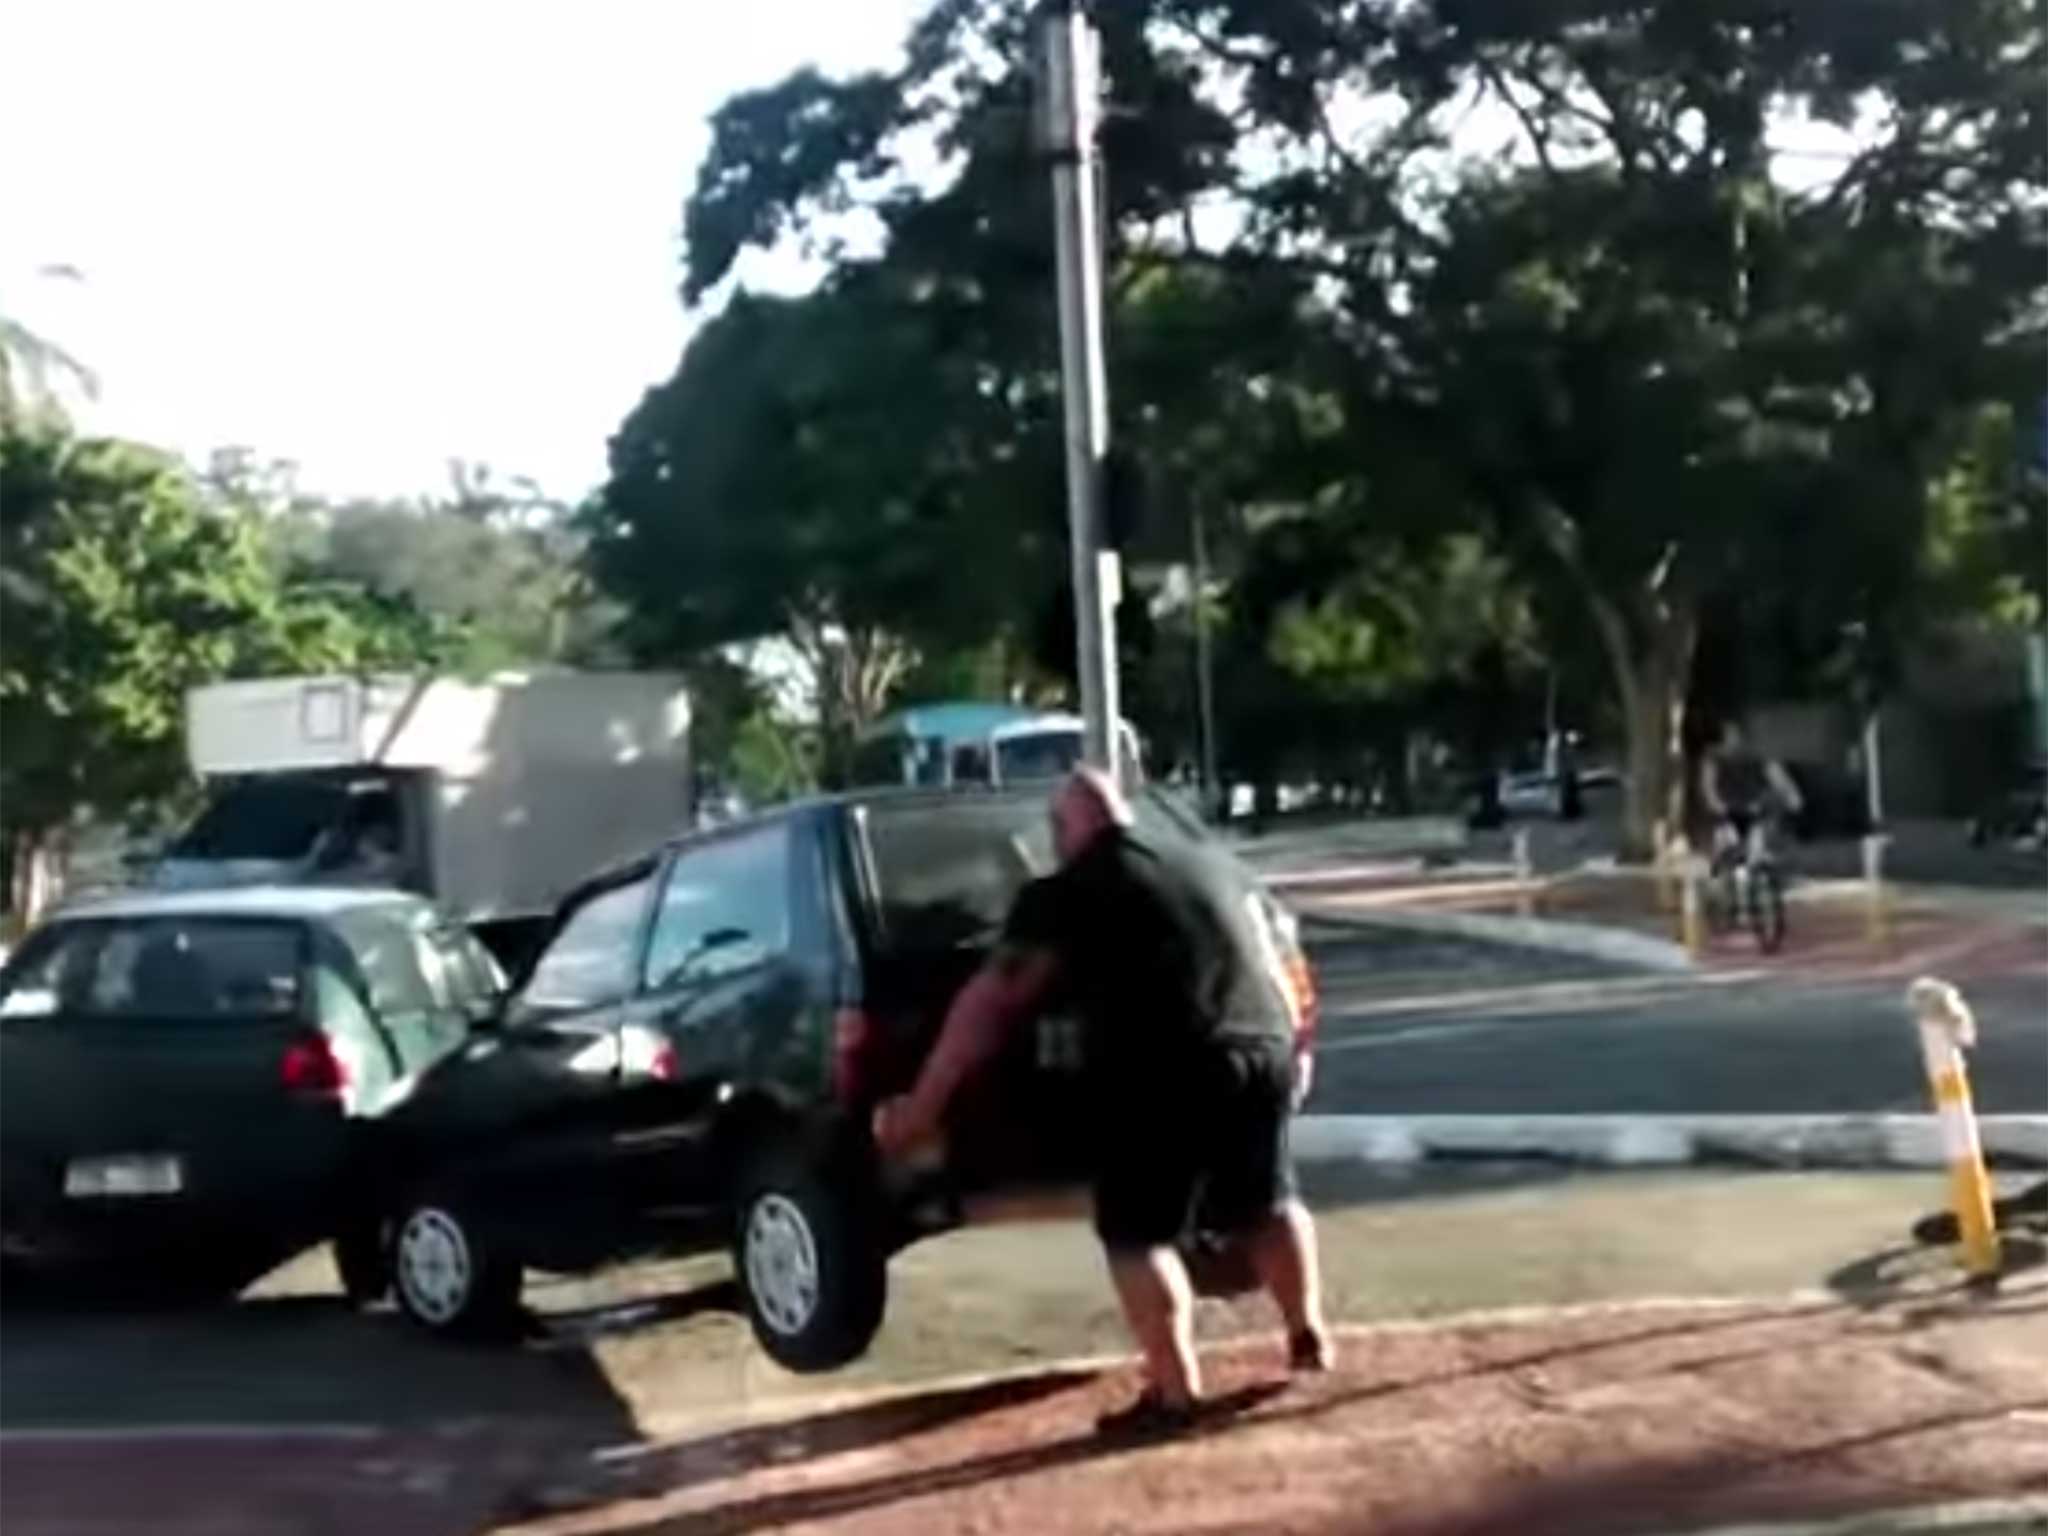 This cyclist was not happy with a car blocking his path